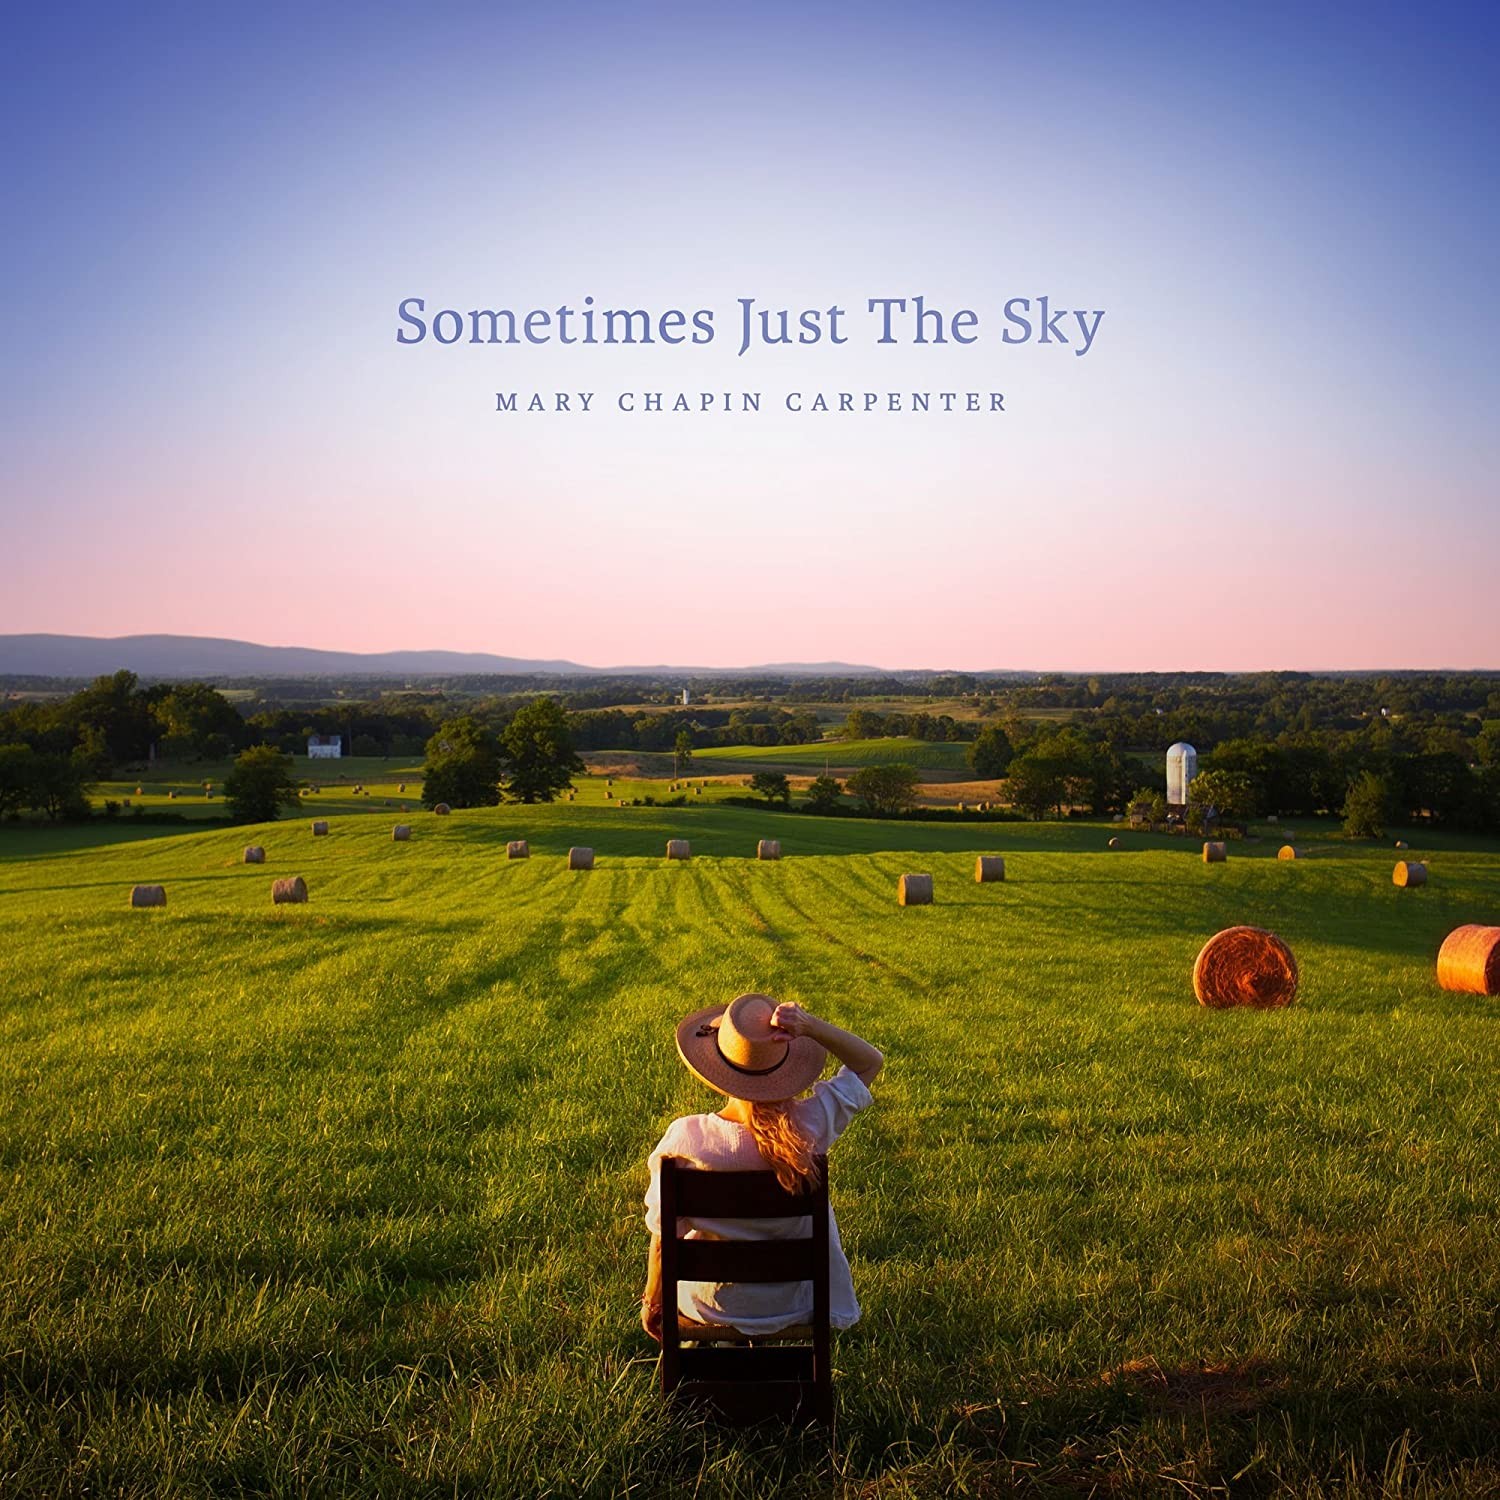 Chapin Carpenter, Mary : Sometimes just the sky (2-LP)